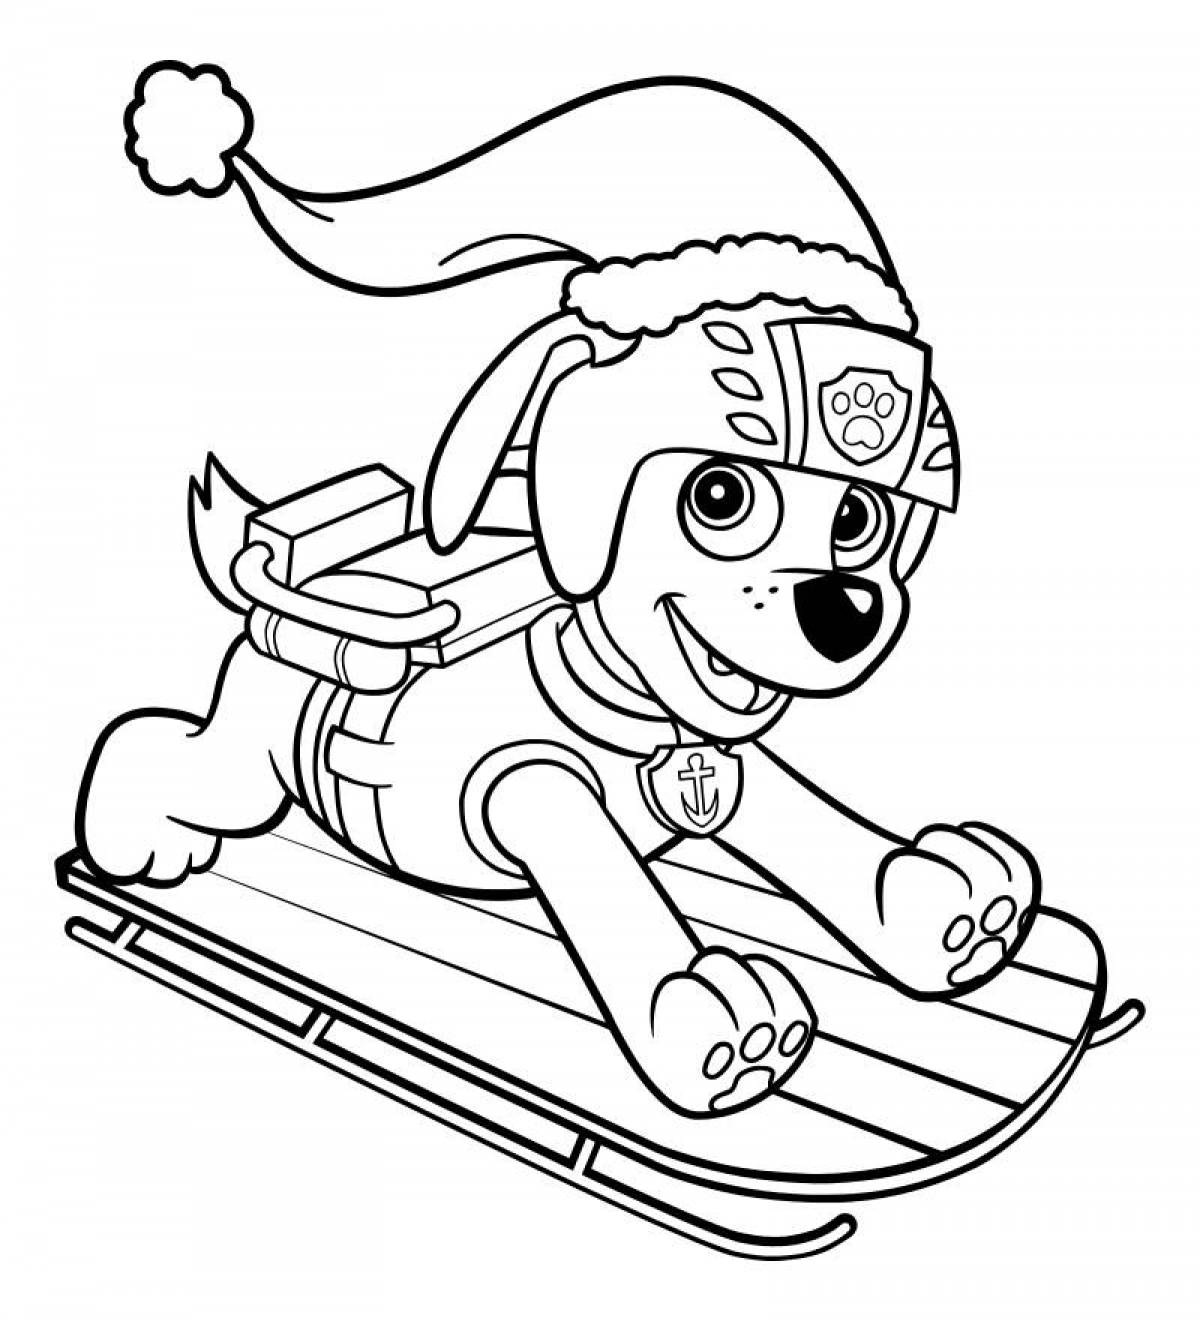 Colorful zoom coloring page